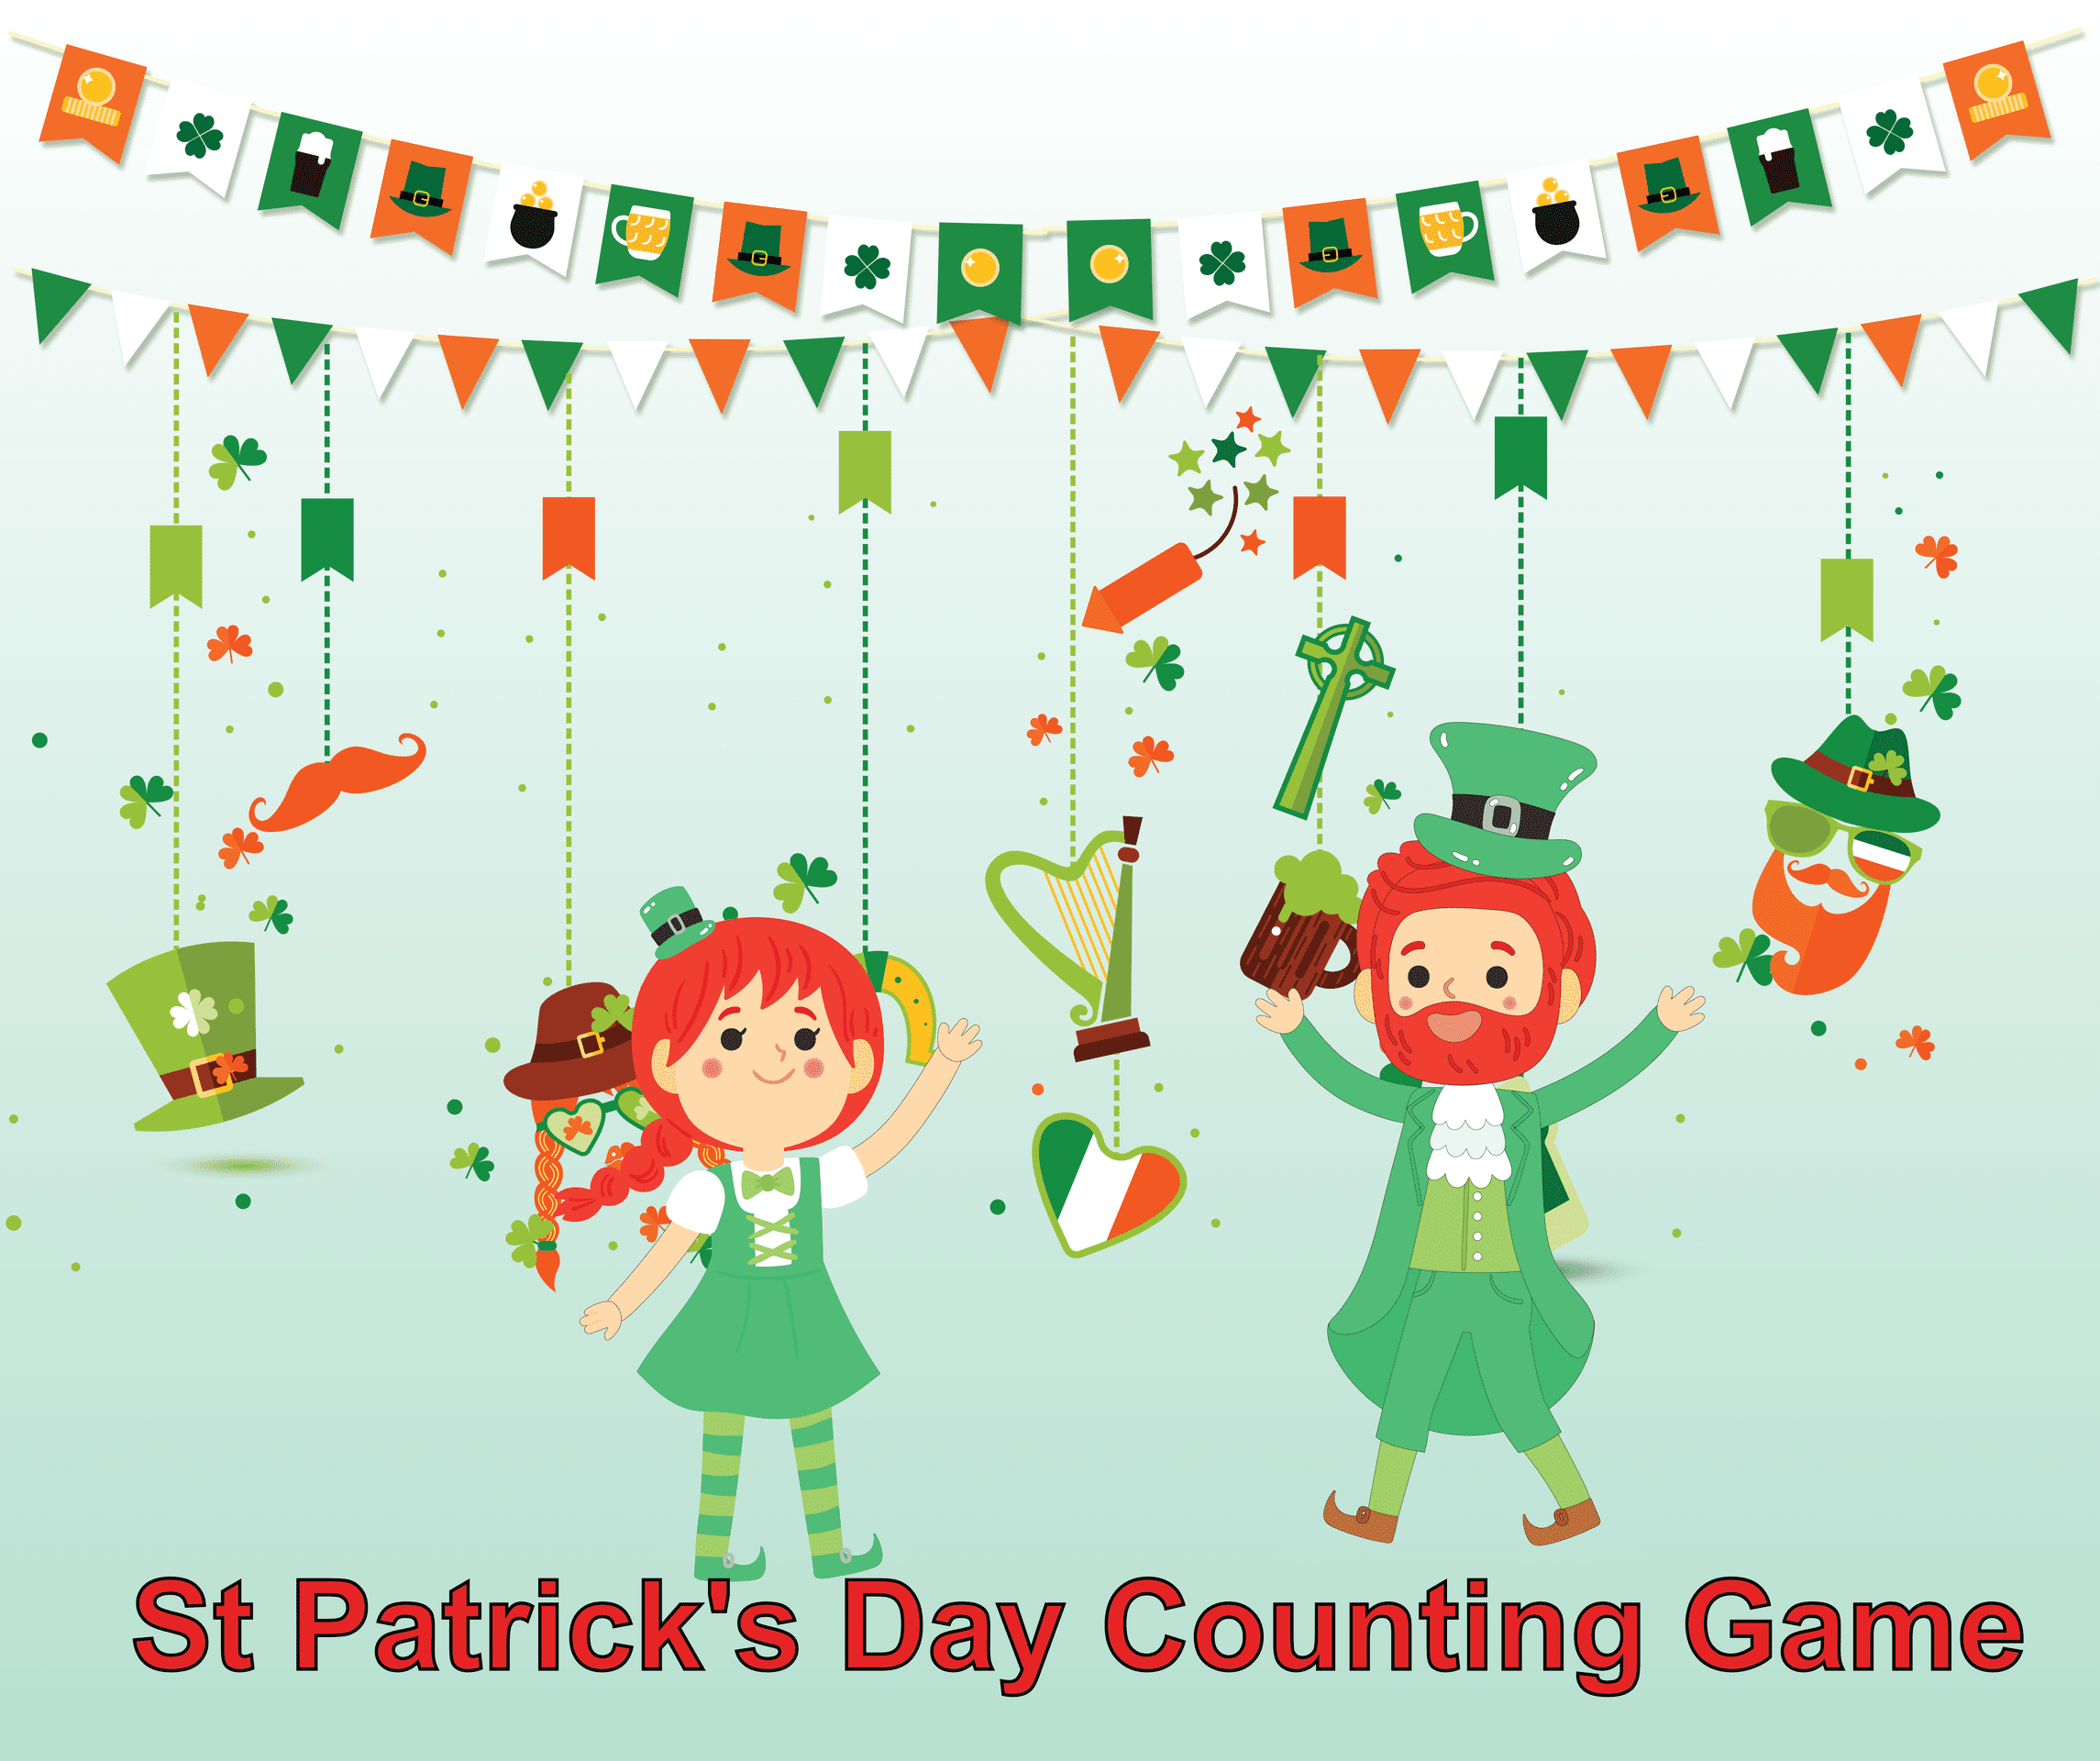 Two guys arranging St Patrick's day Counting Game